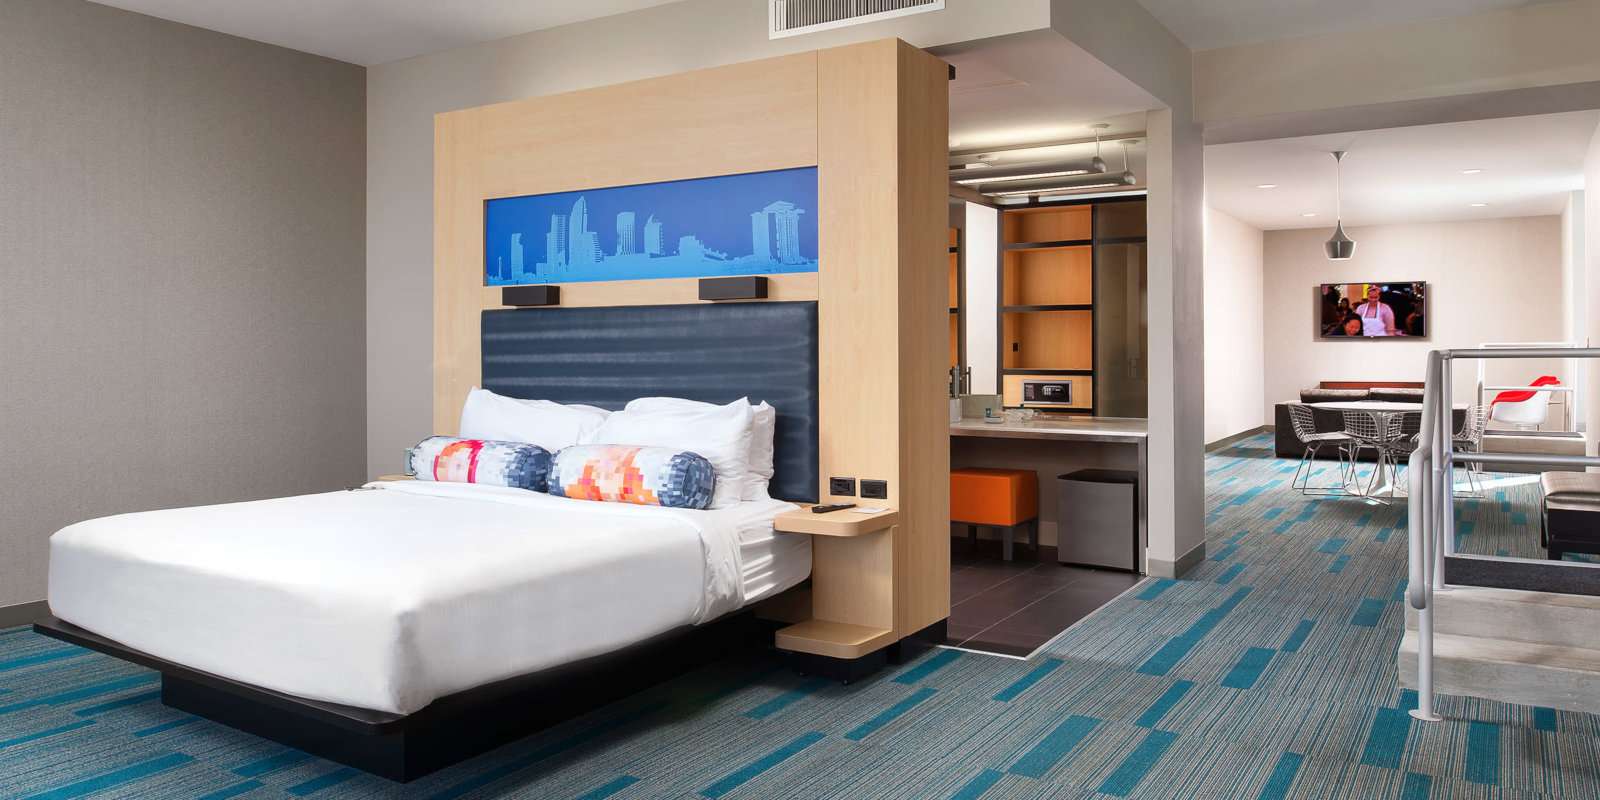 Millennial gay travellers will love the Aloft Hotel in Tampa, with cool events and free accommodation for your pets!